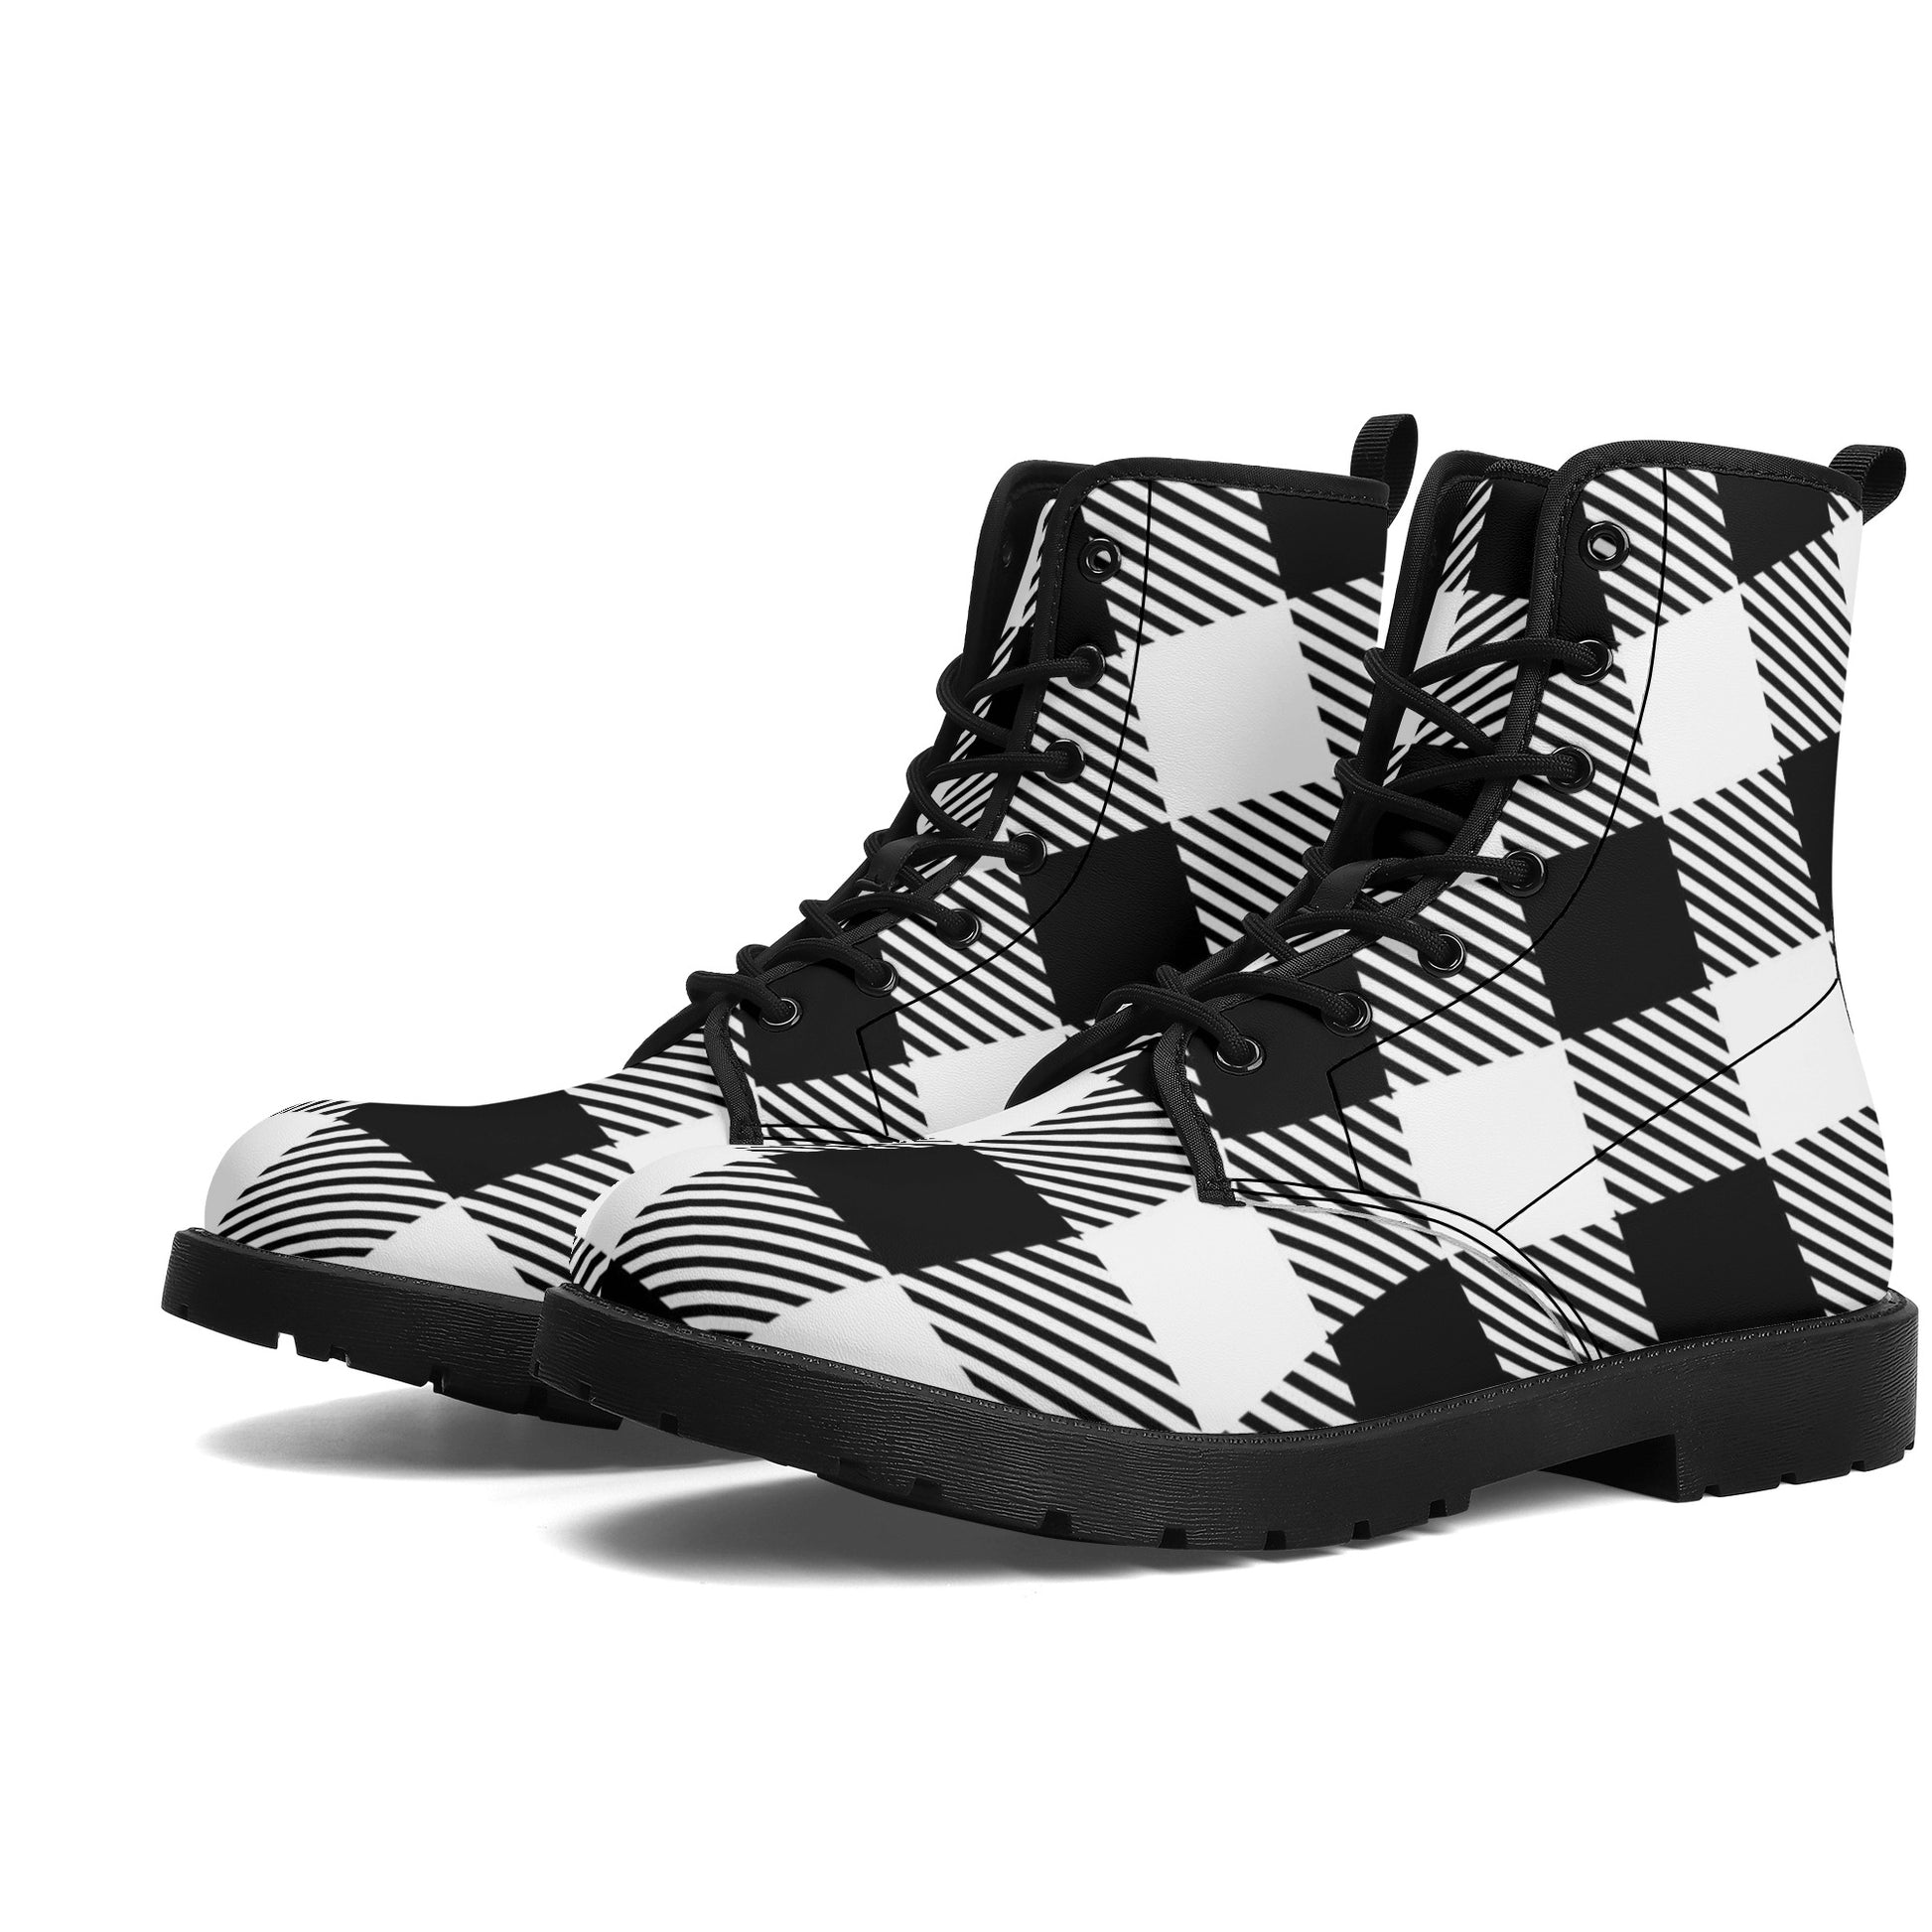 Black White Buffalo Plaid Women Leather Boots, Check Vegan Lace Up Shoes Hiking Festival Ankle Combat Work Winter Waterproof Custom Starcove Fashion